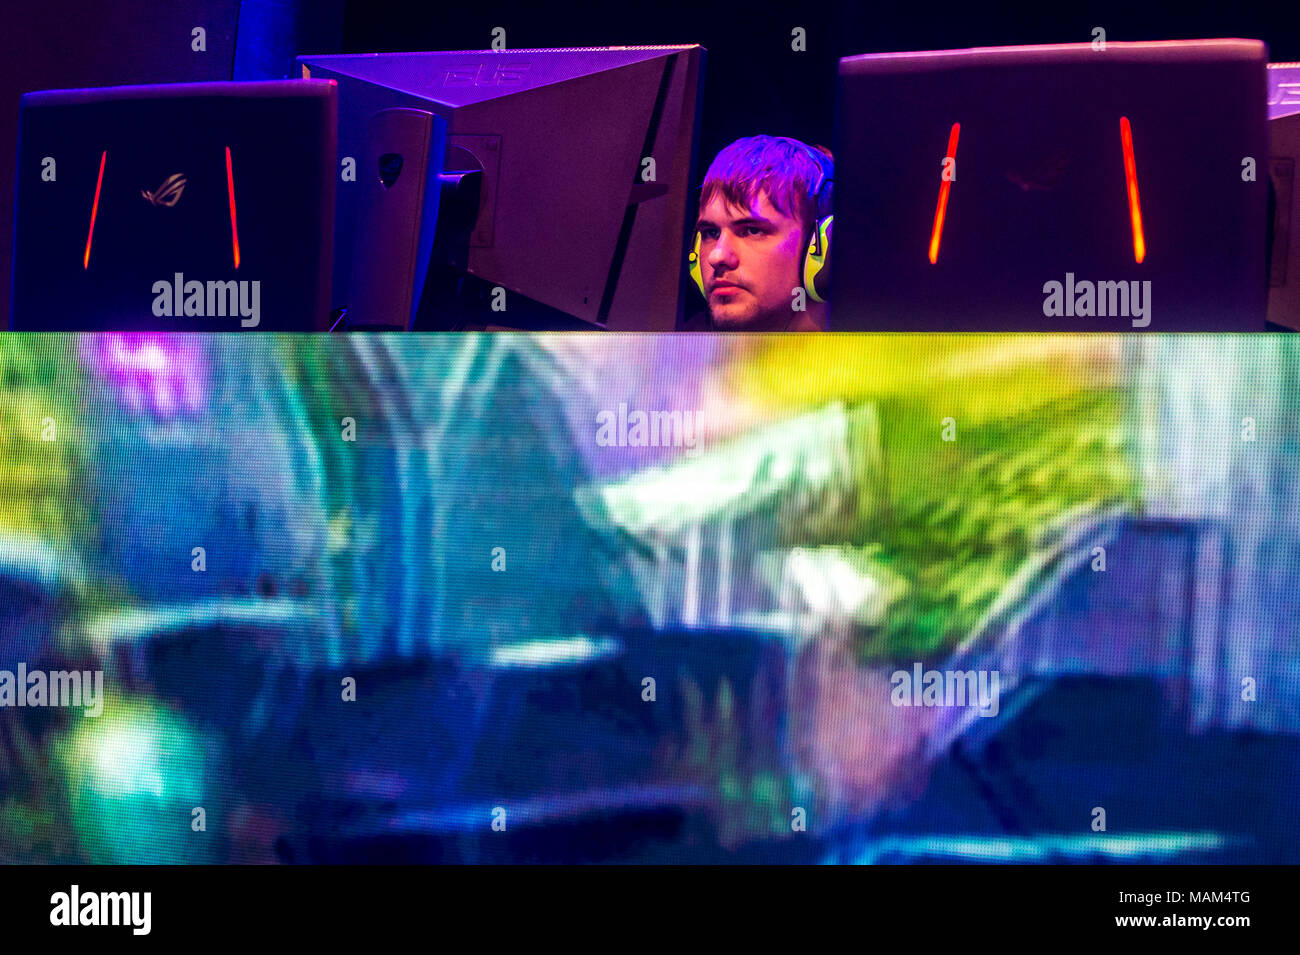 Svitavy, Czech Republic. 01st Apr, 2018. Hitpoint Legends - finals of national league in professional playing of League of Legends computer game was held in Svitavy, Czech Republic, on April 1, 2018. Credit: David Tanecek/CTK Photo/Alamy Live News Stock Photo